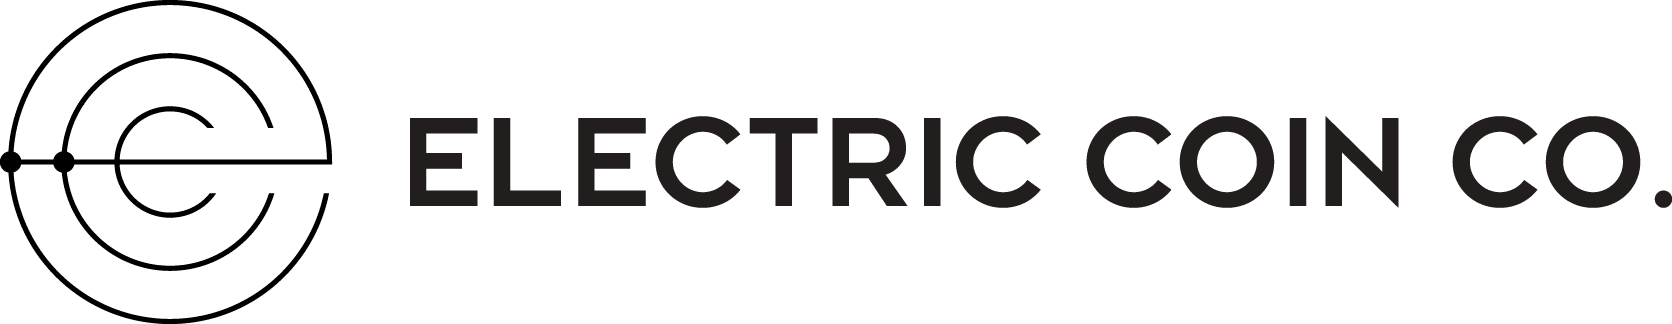 Electric Coin Co.